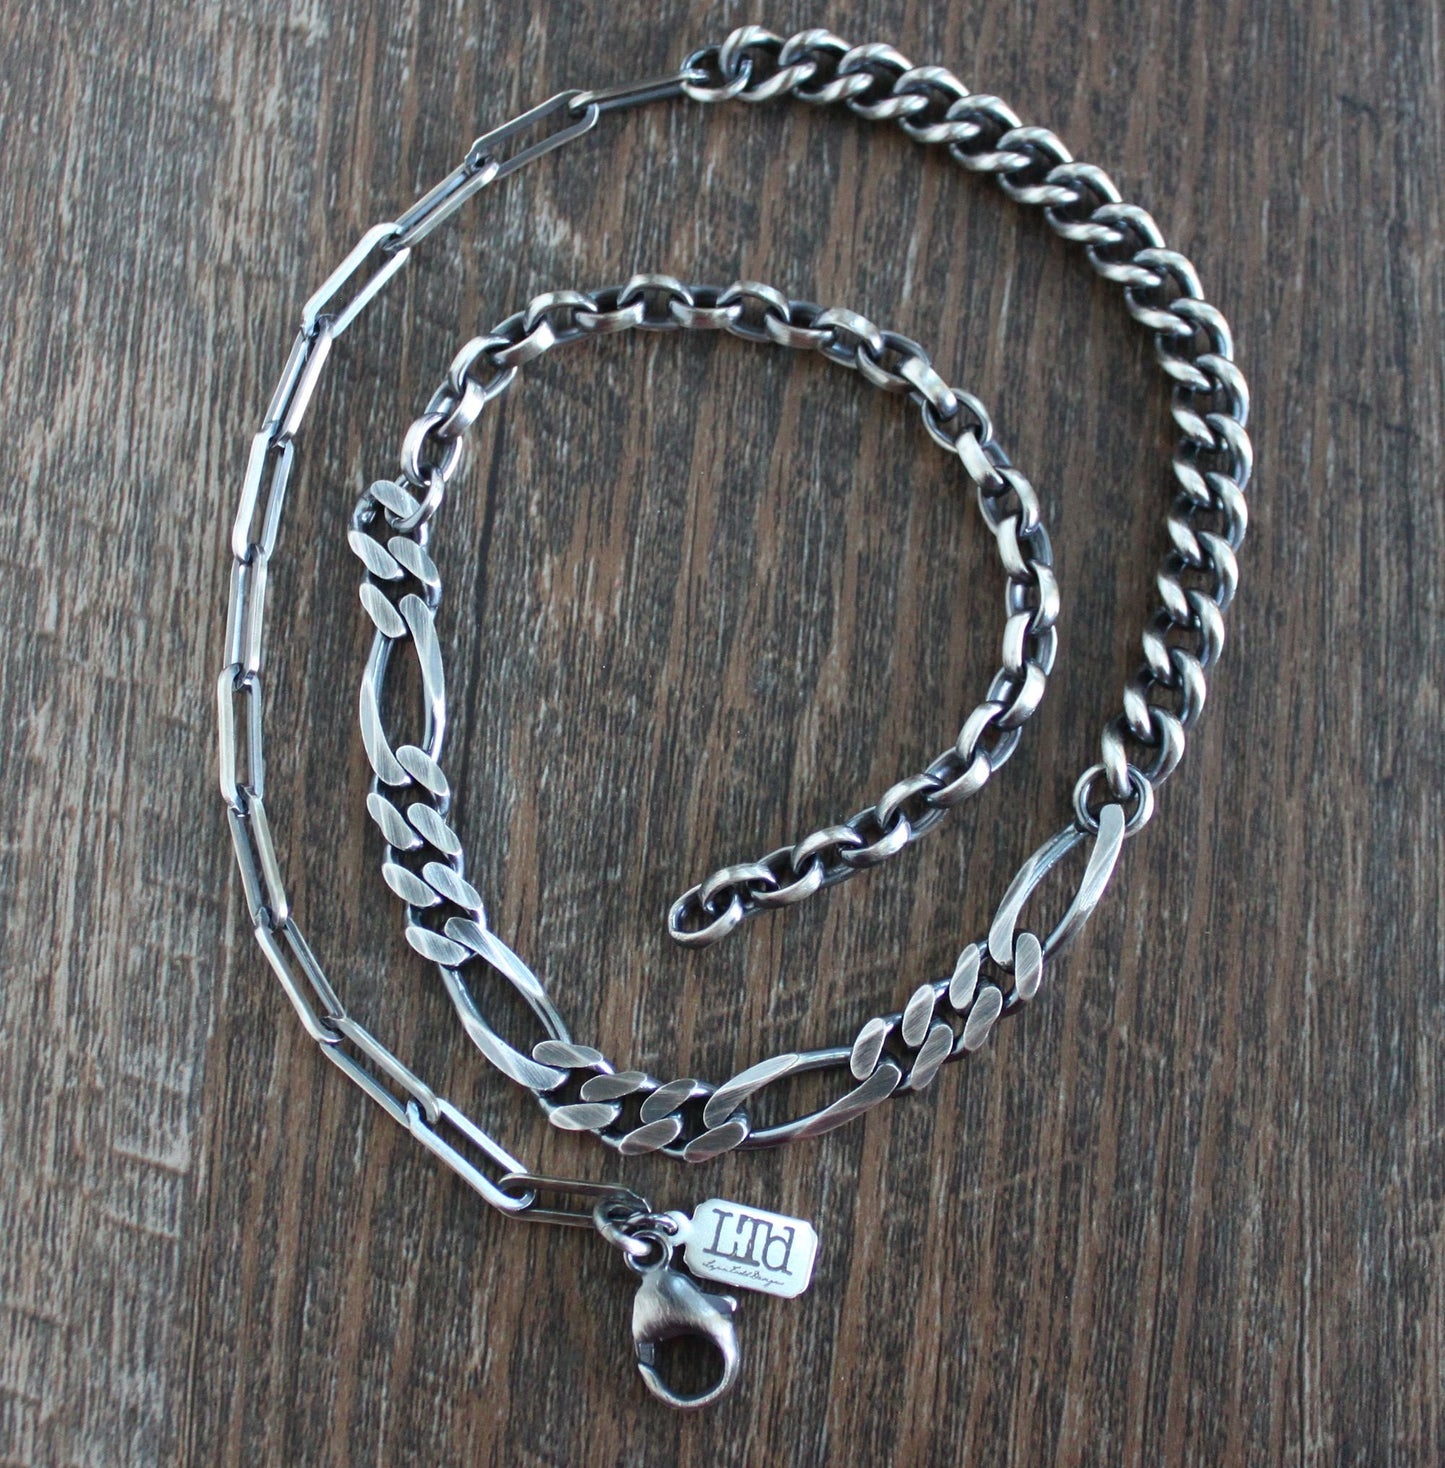 Silver Mixed Chain Necklace, 20 inches